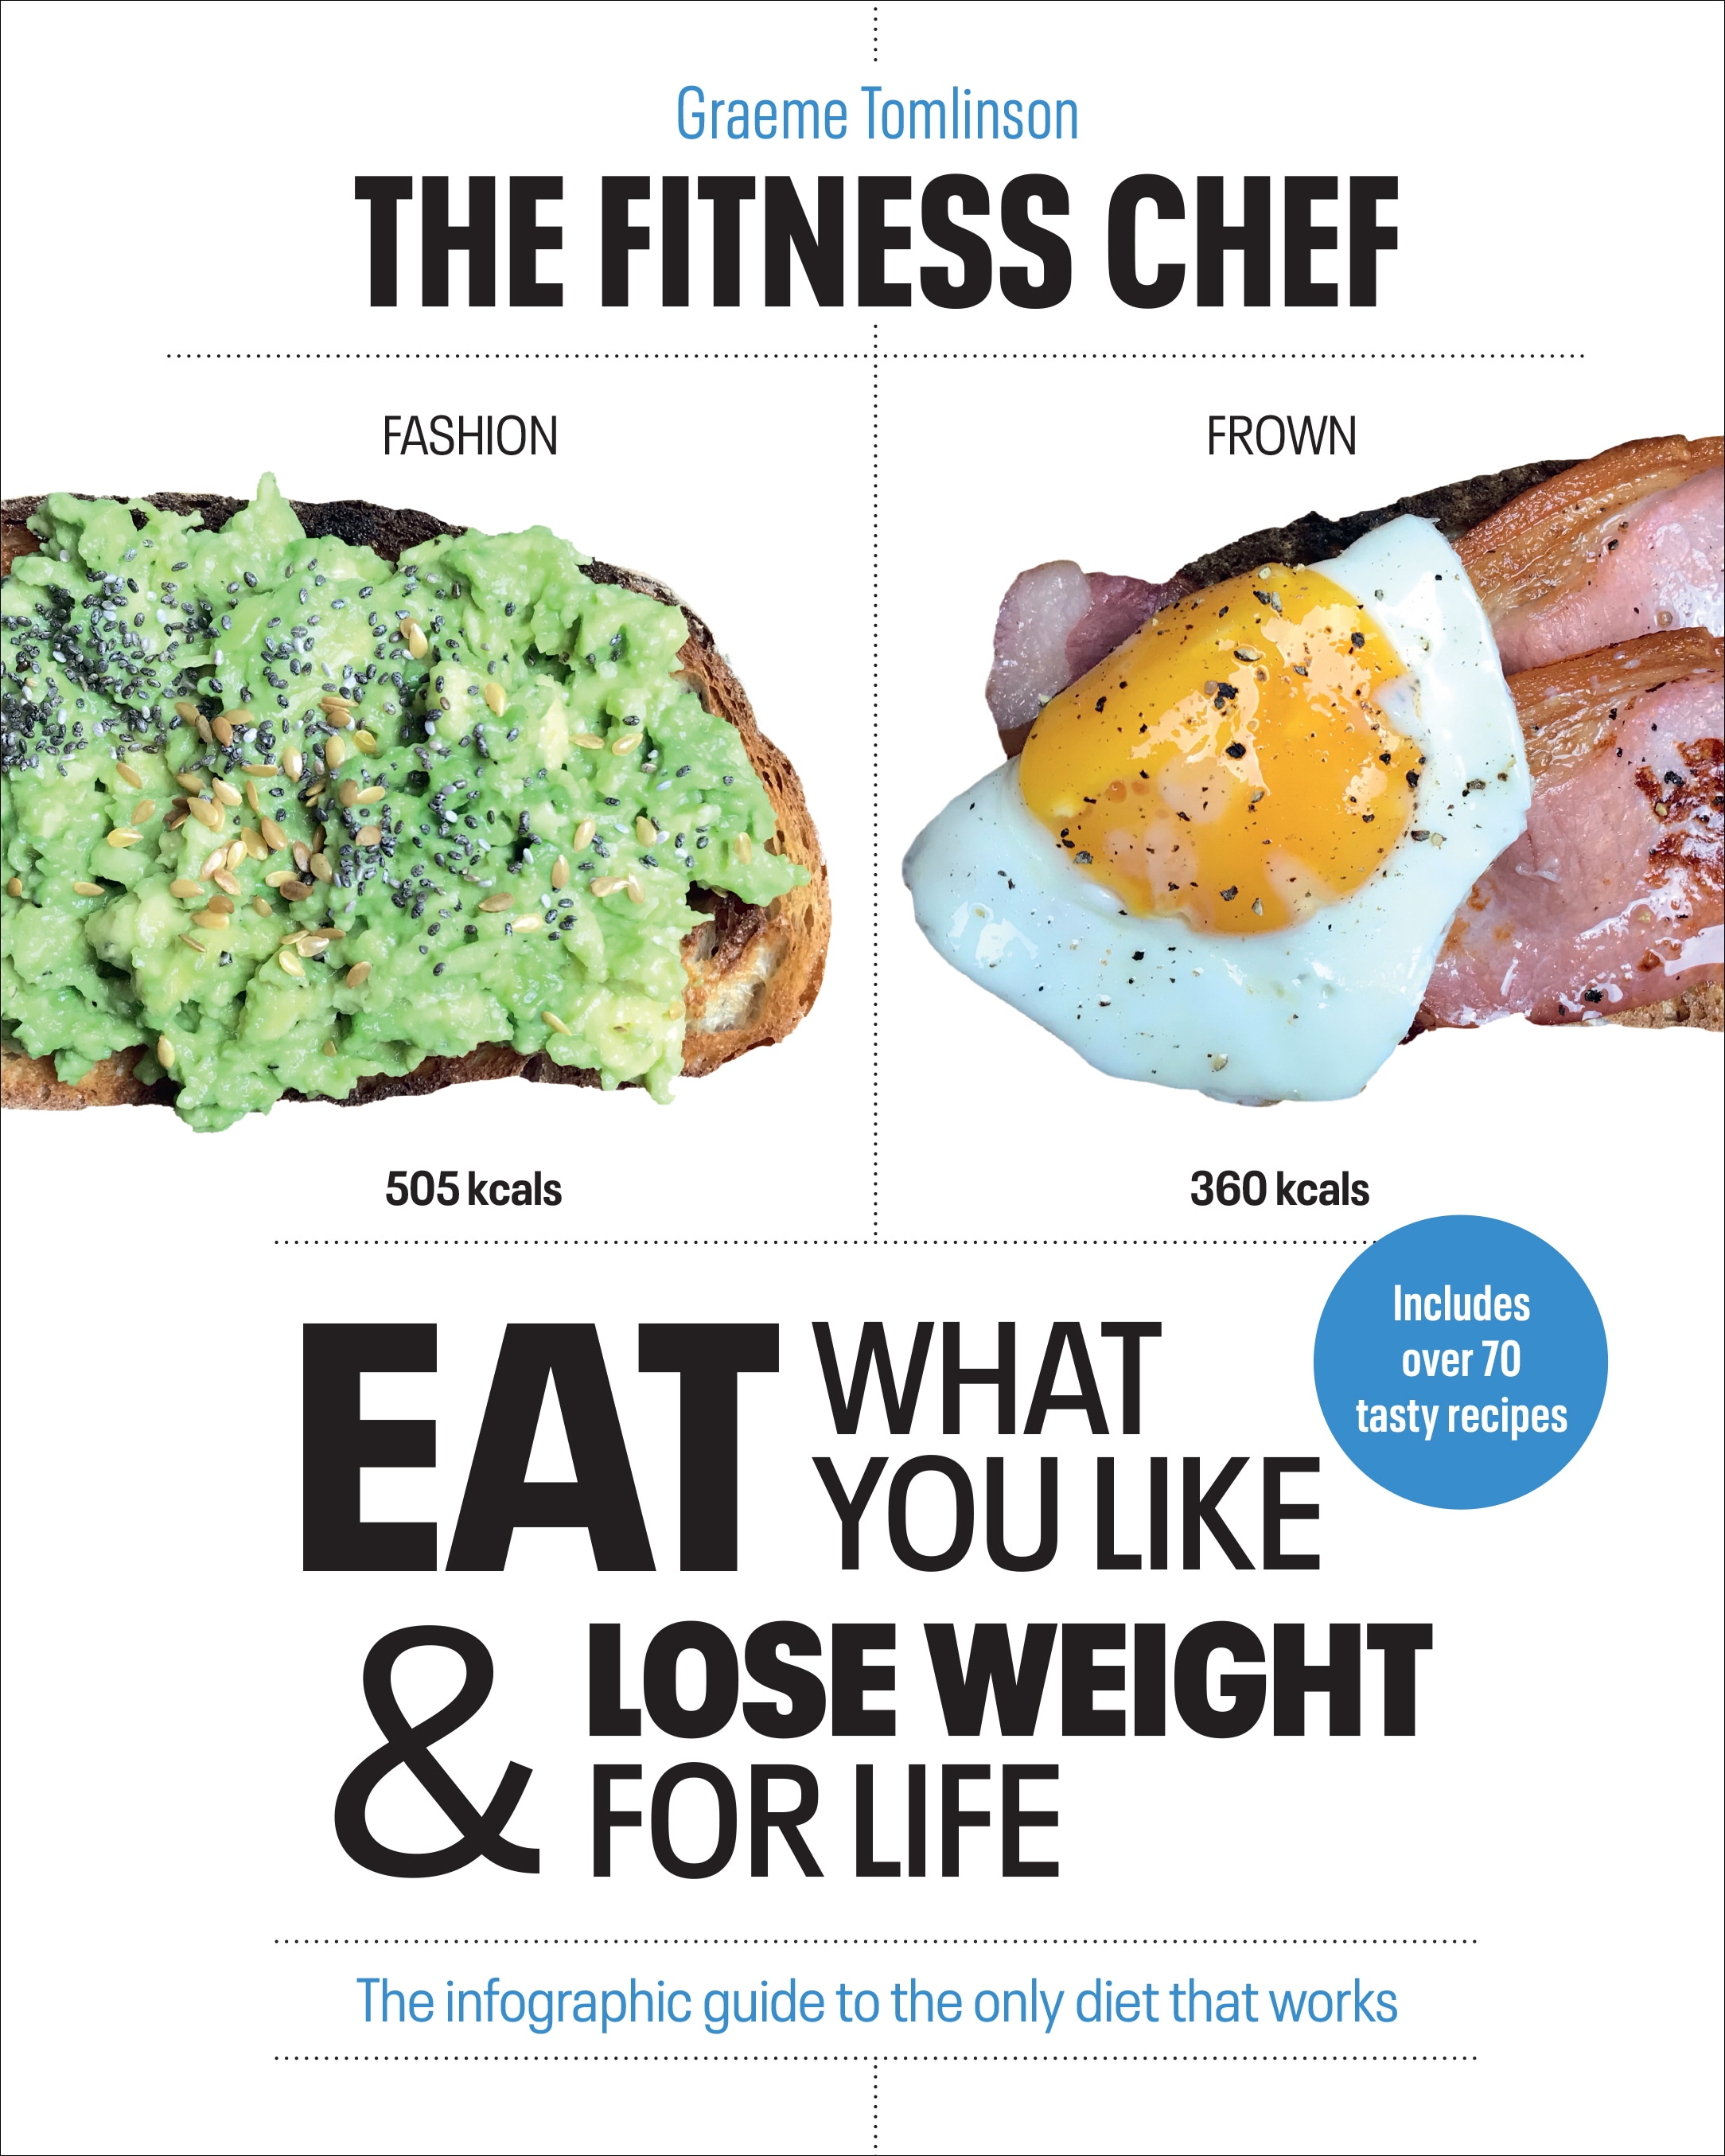 Book “THE FITNESS CHEF” by Graeme Tomlinson — December 26, 2019